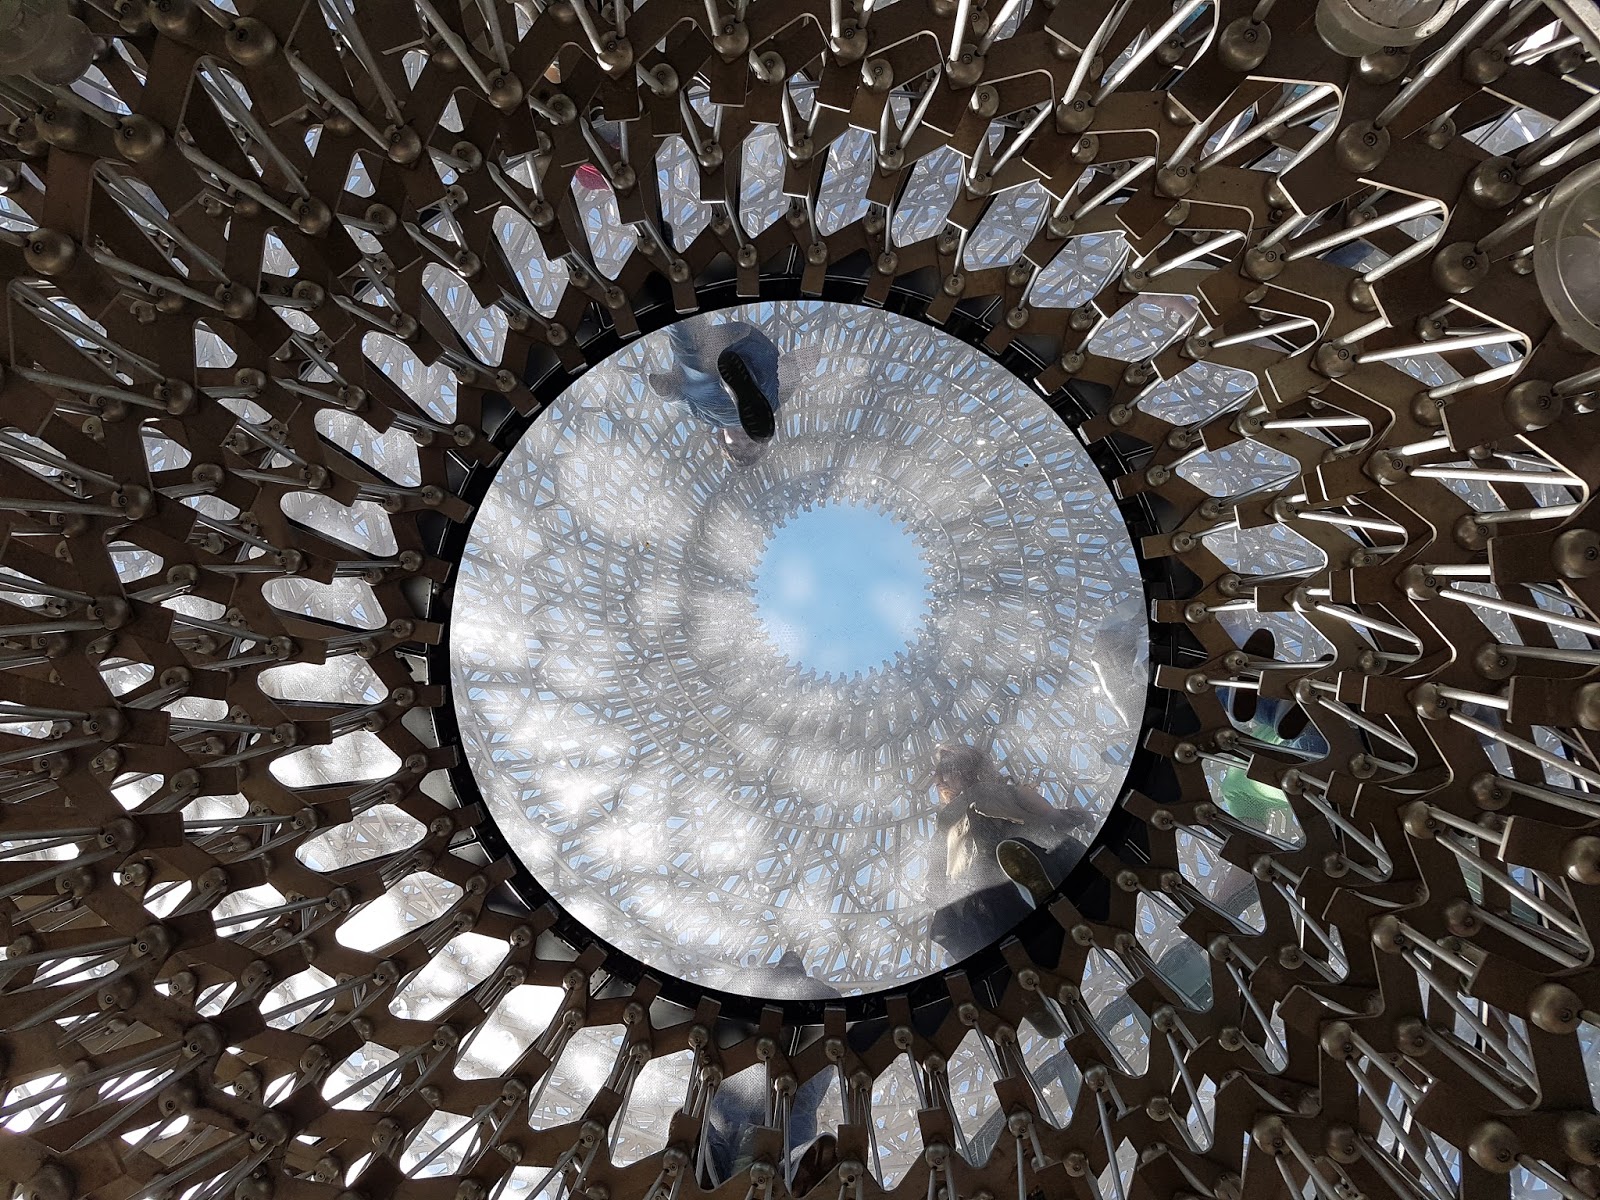 The Hive bee nest structure at Kew Gardens from below